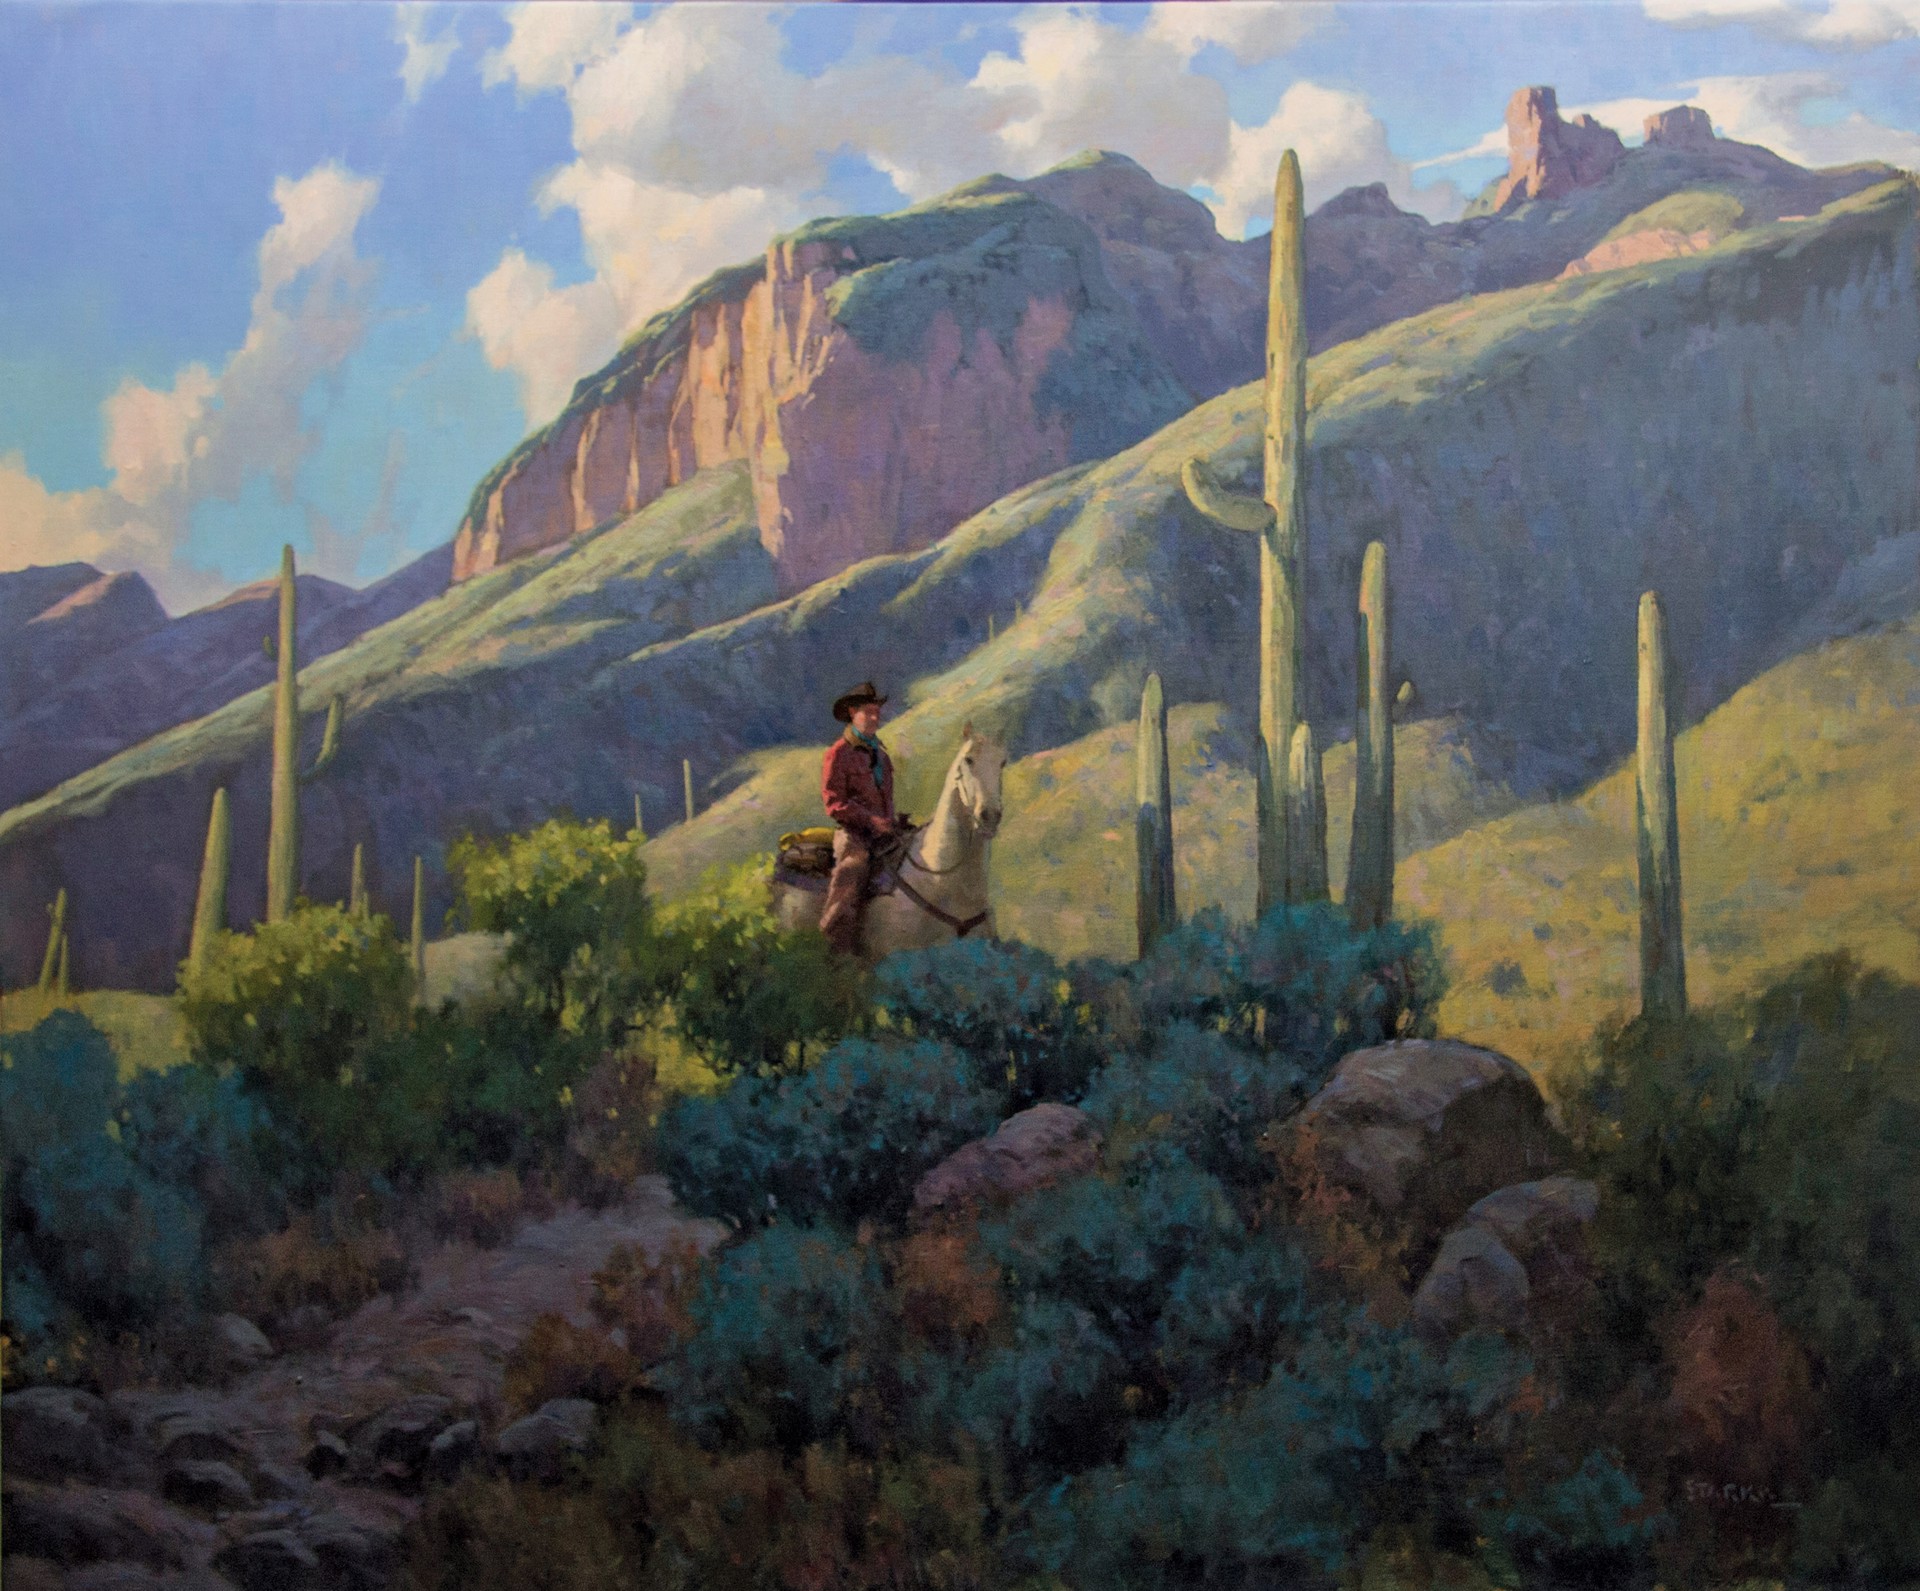 Evening Shadows in the Catalinas by Phil Starke